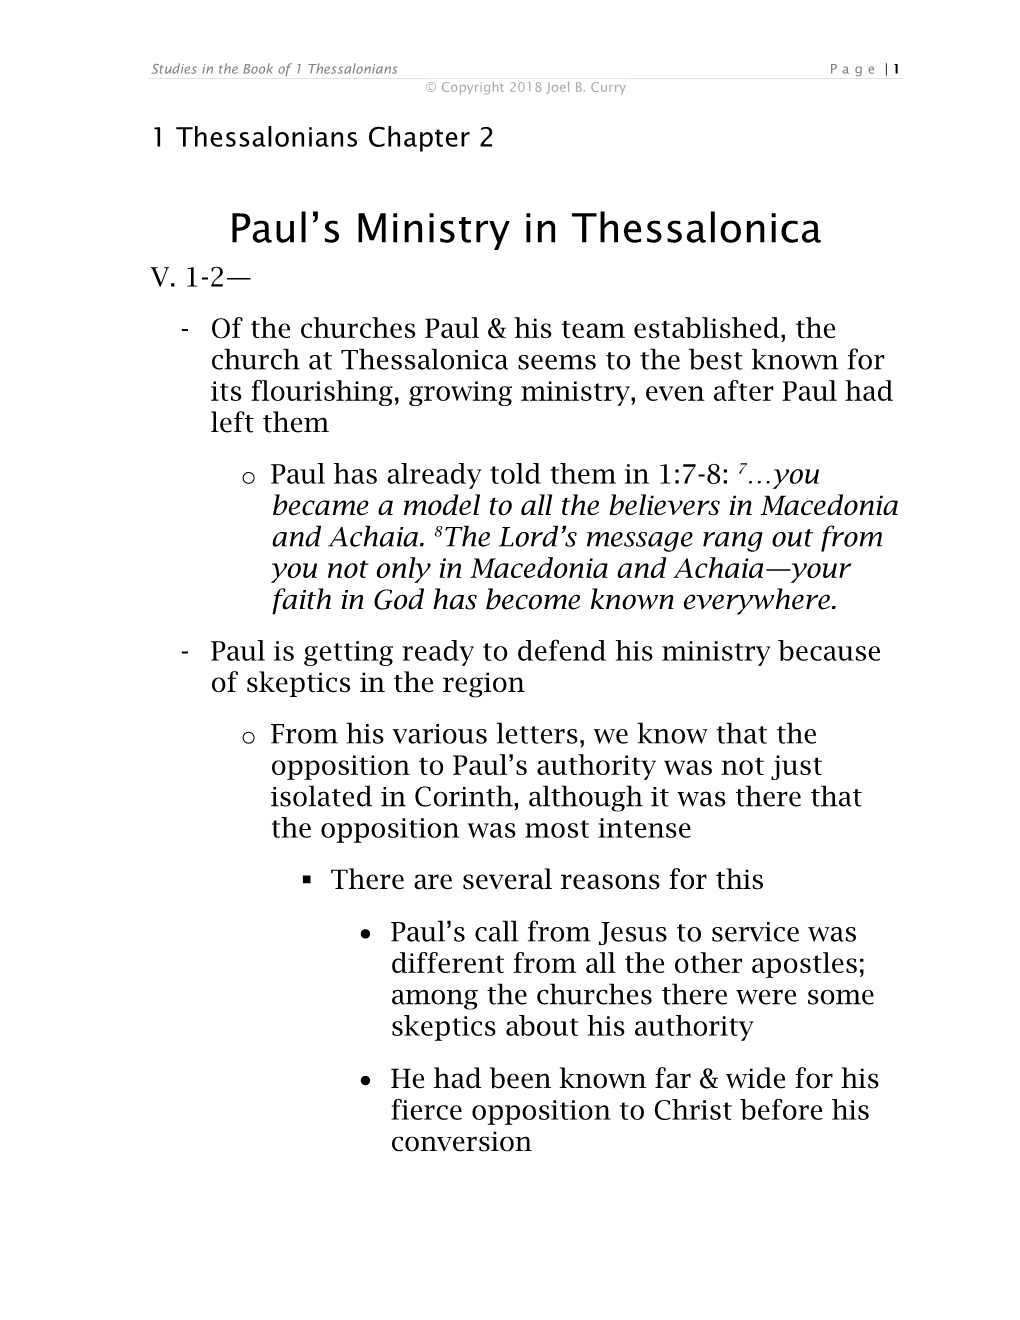 Paul's Ministry in Thessalonica